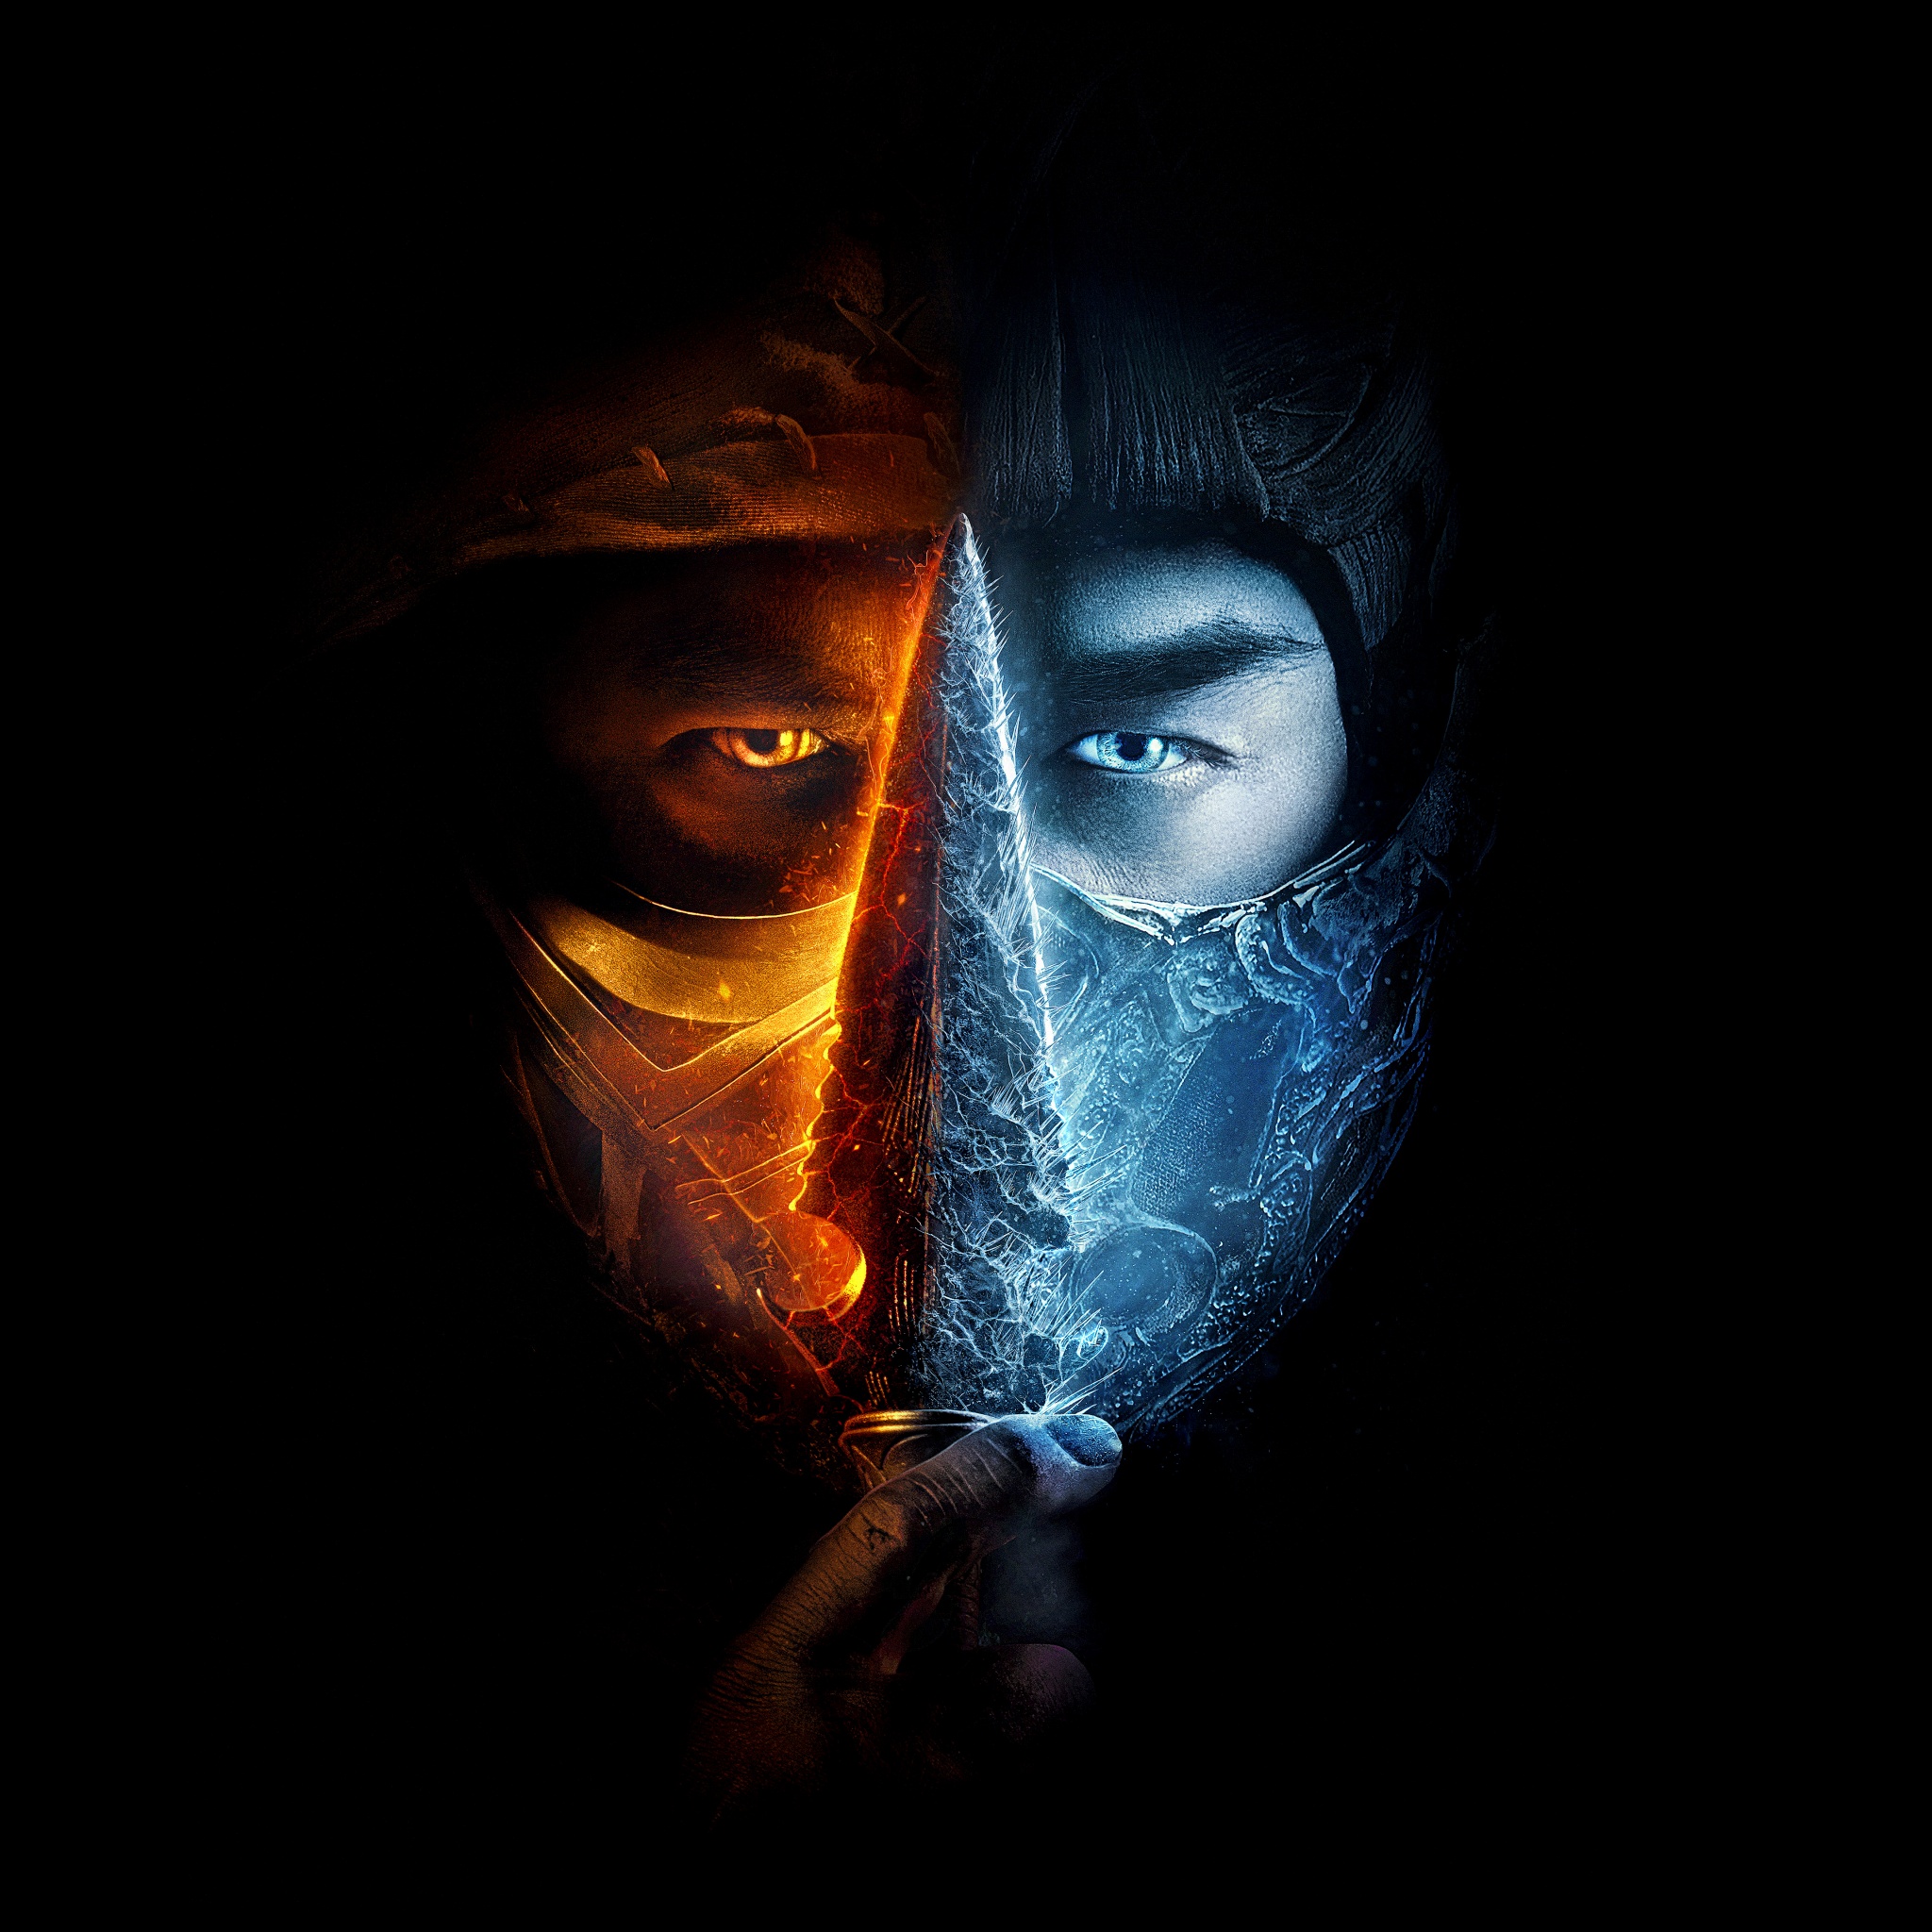 Scorpion for Android Scorpion MK 11 HD phone wallpaper  Pxfuel